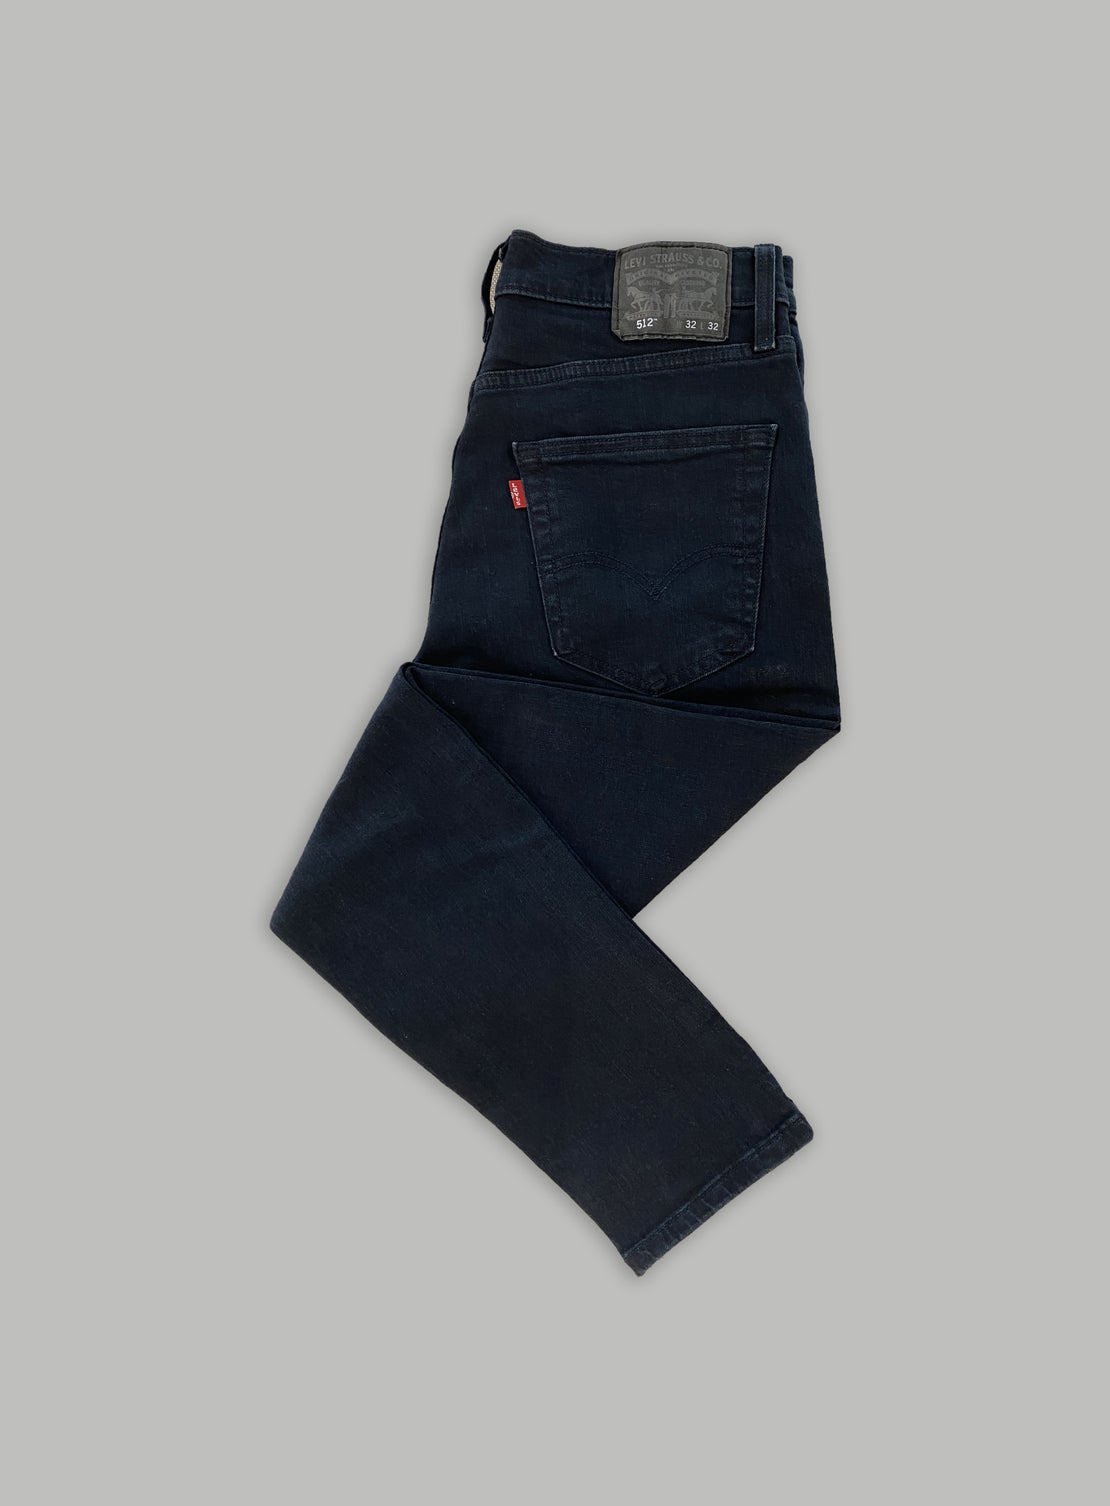 Levi's 512 Slim Taper - Forest Adv - Product - Working Style